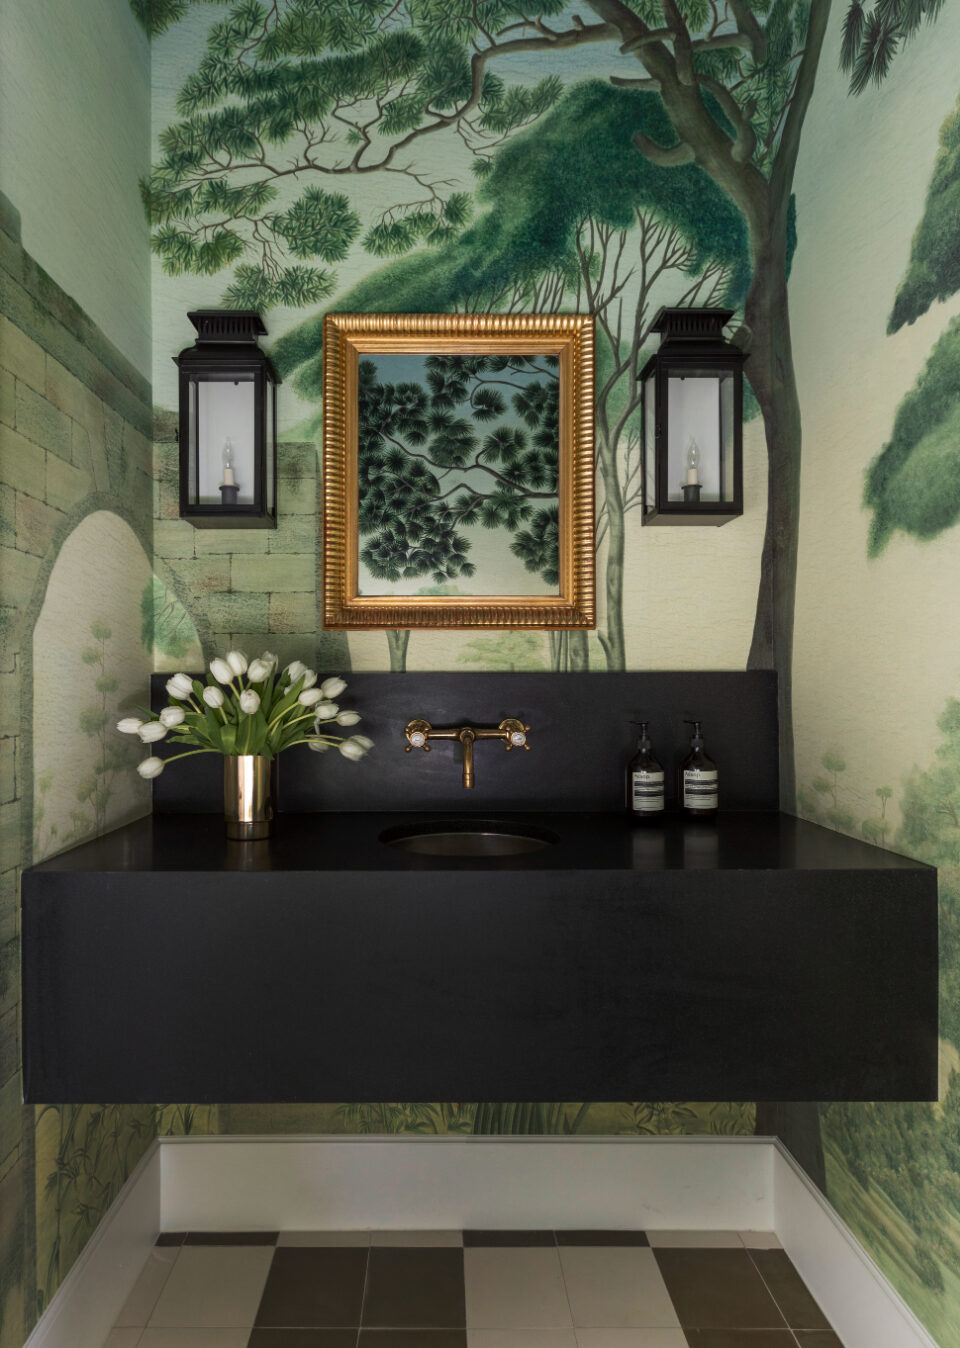 When the client asked for something “really fabulous” in a powder room, Epley went straight for Italian Panoramic Panels by Iksel for Schumacher. The sink, sconces, and tile were existing. “It’s fun sometimes as a designer to go on top and add your layer, instead of there being no parameters,” she says. JULIE SOEFER